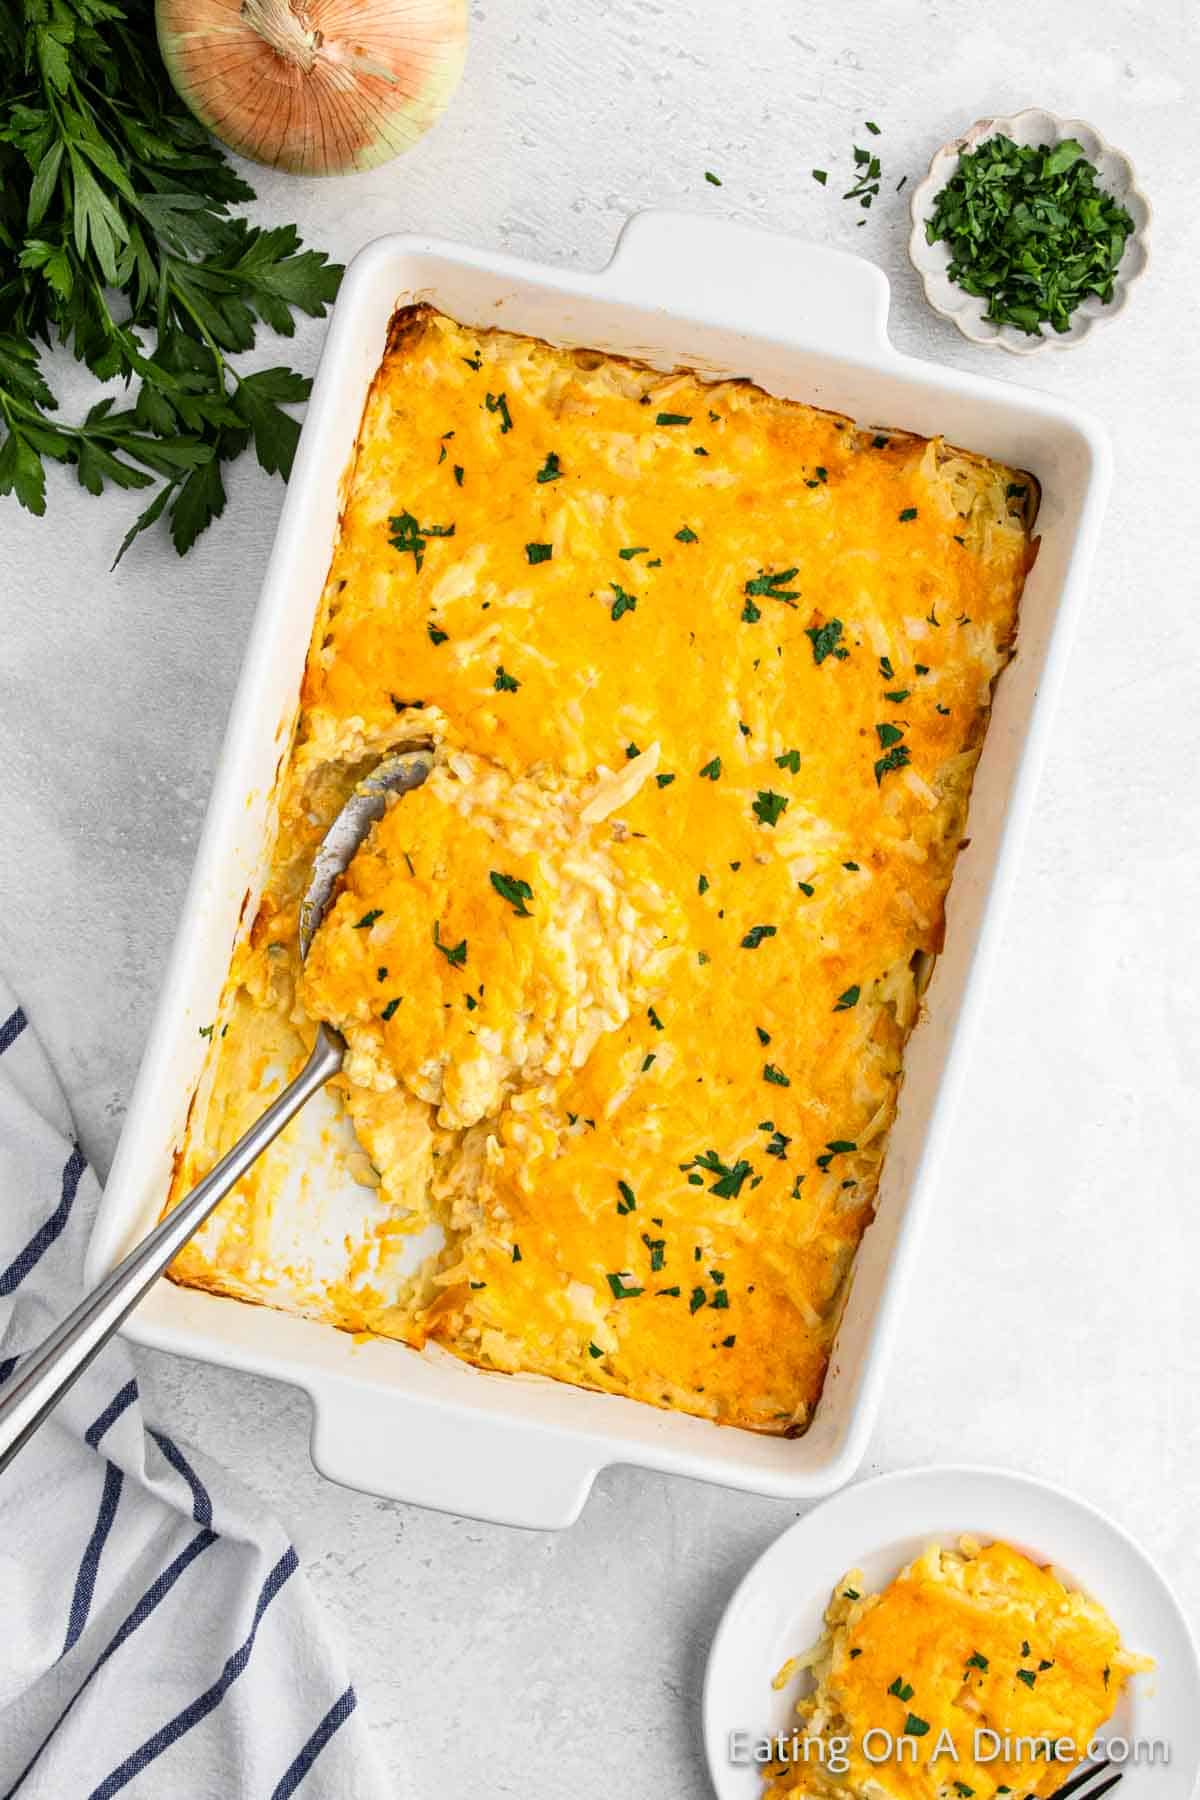 Cheesy potato casserole in a baking dish with a serving on a silver spoon